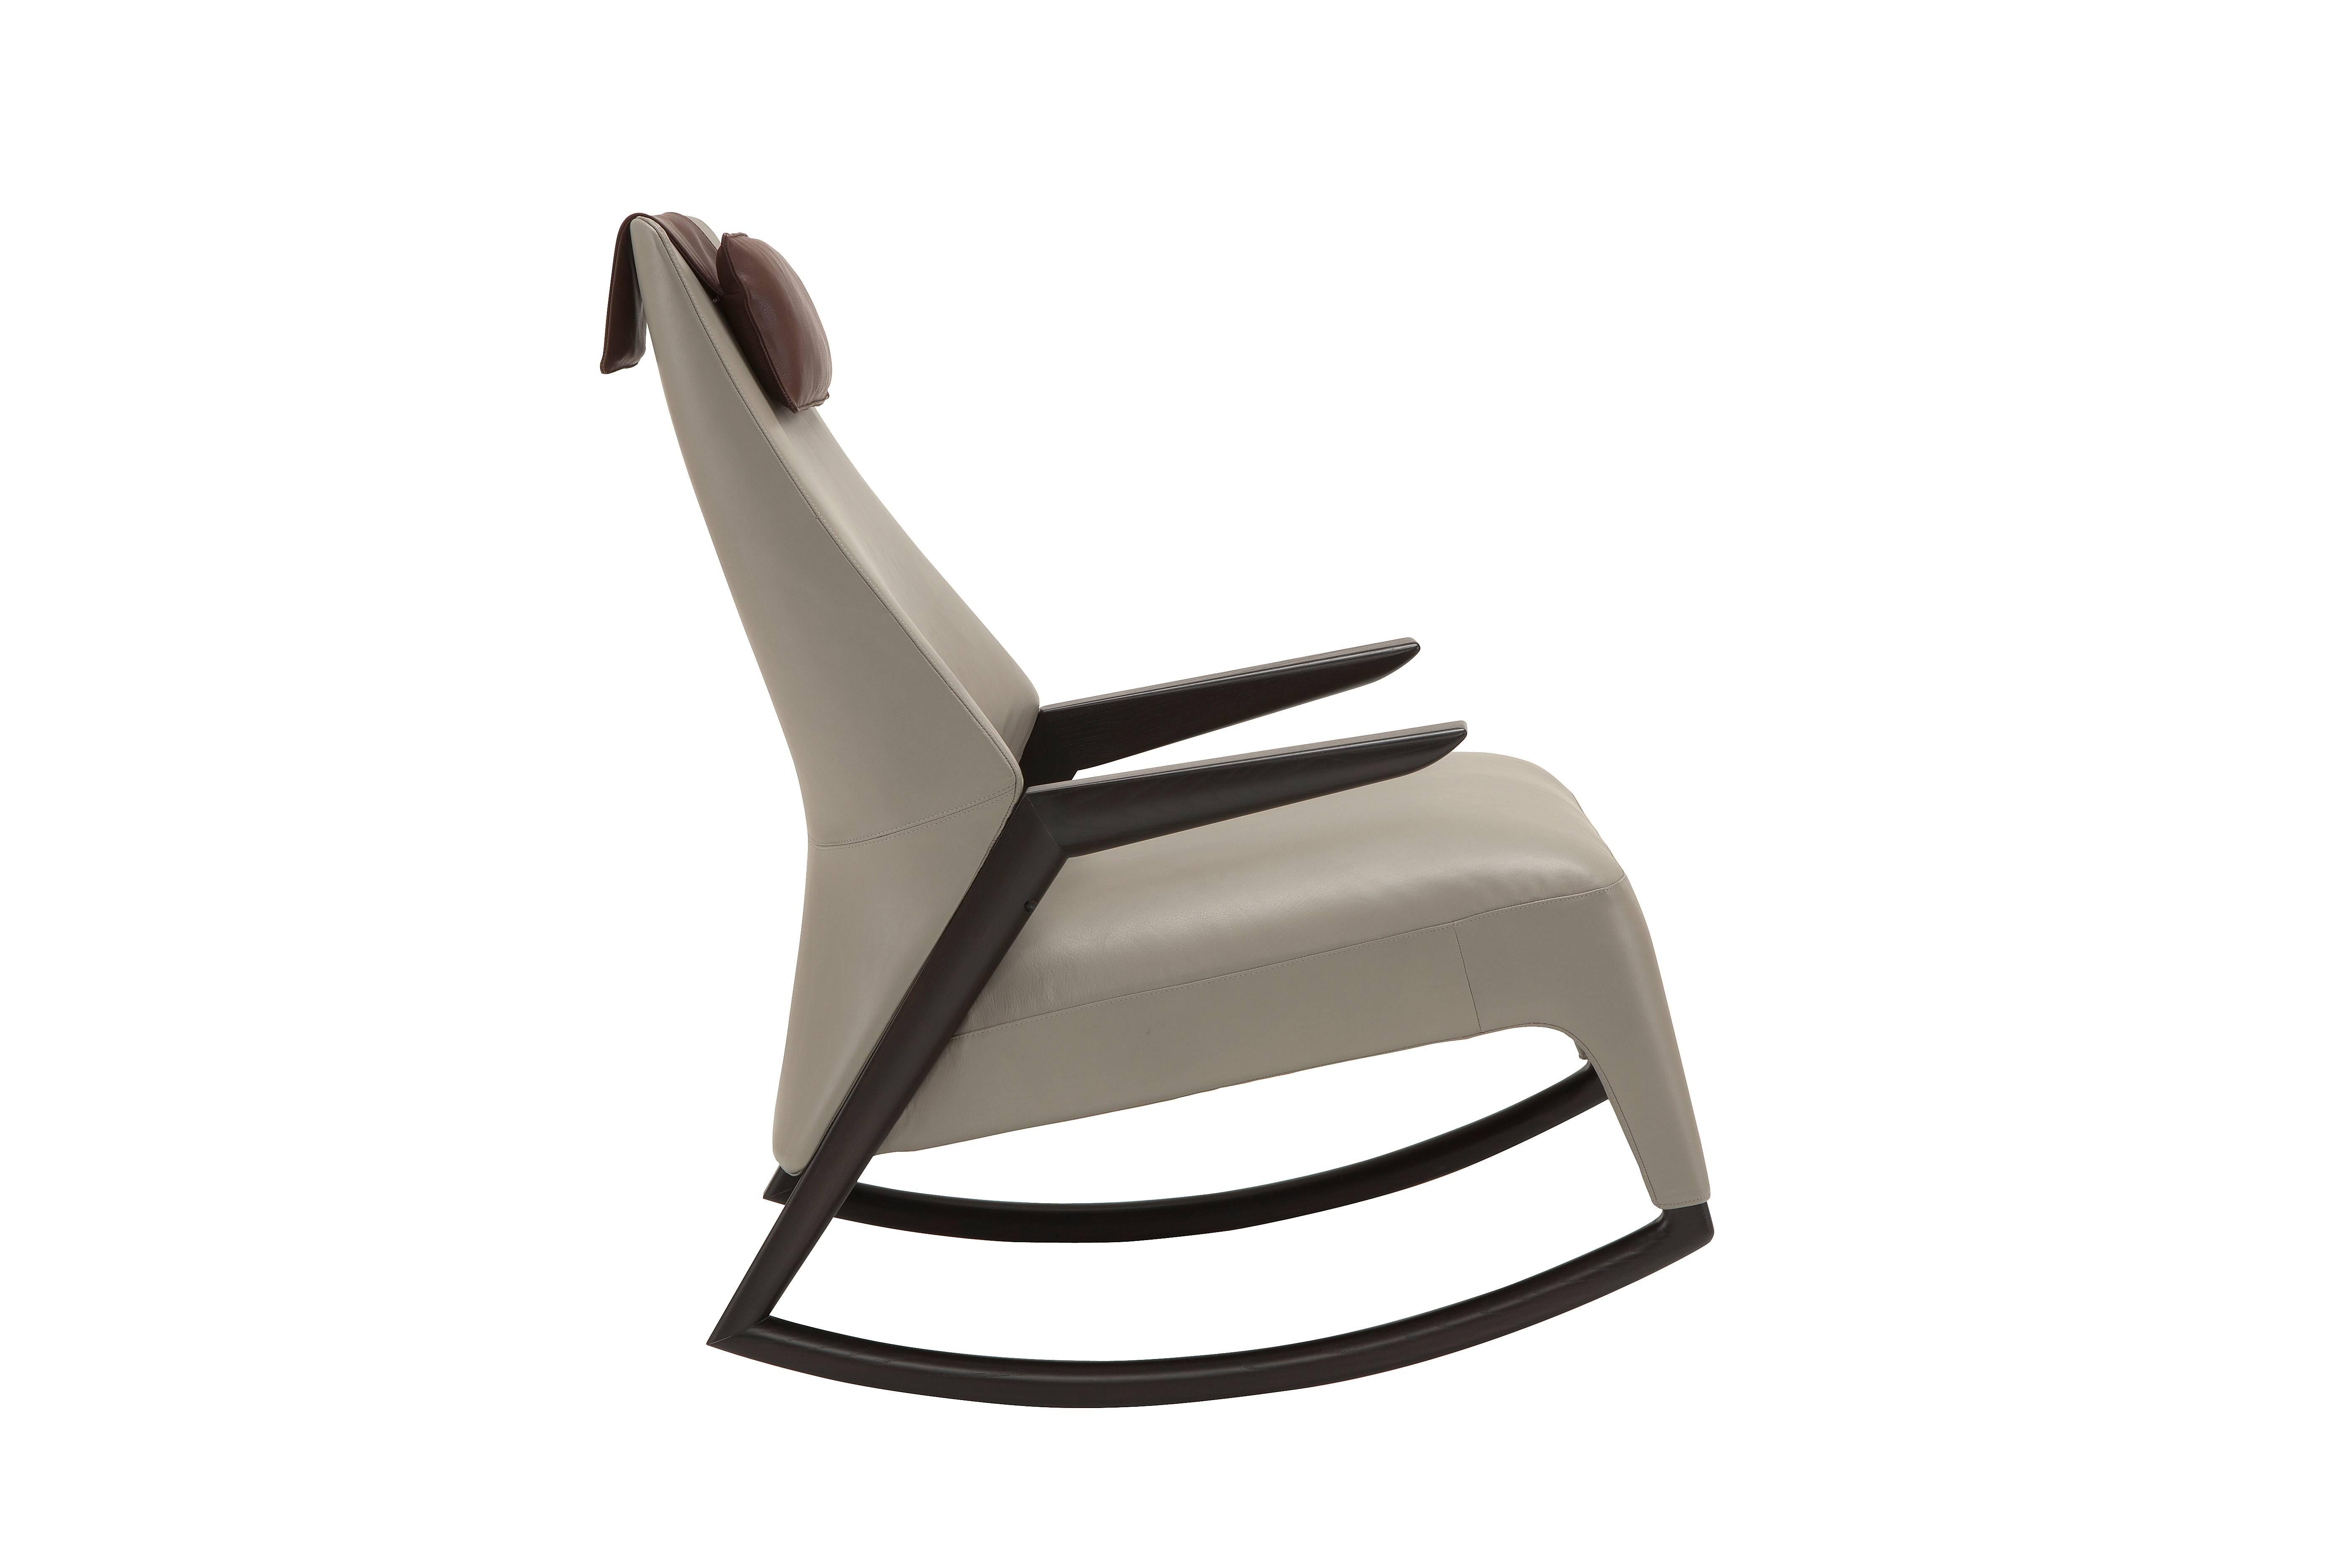 How do you renew the tradition of the rocking chair with a contemporary approach? The Coccolo armchair does this by playing with chromatic juxtaposition and the desire to enhance them.